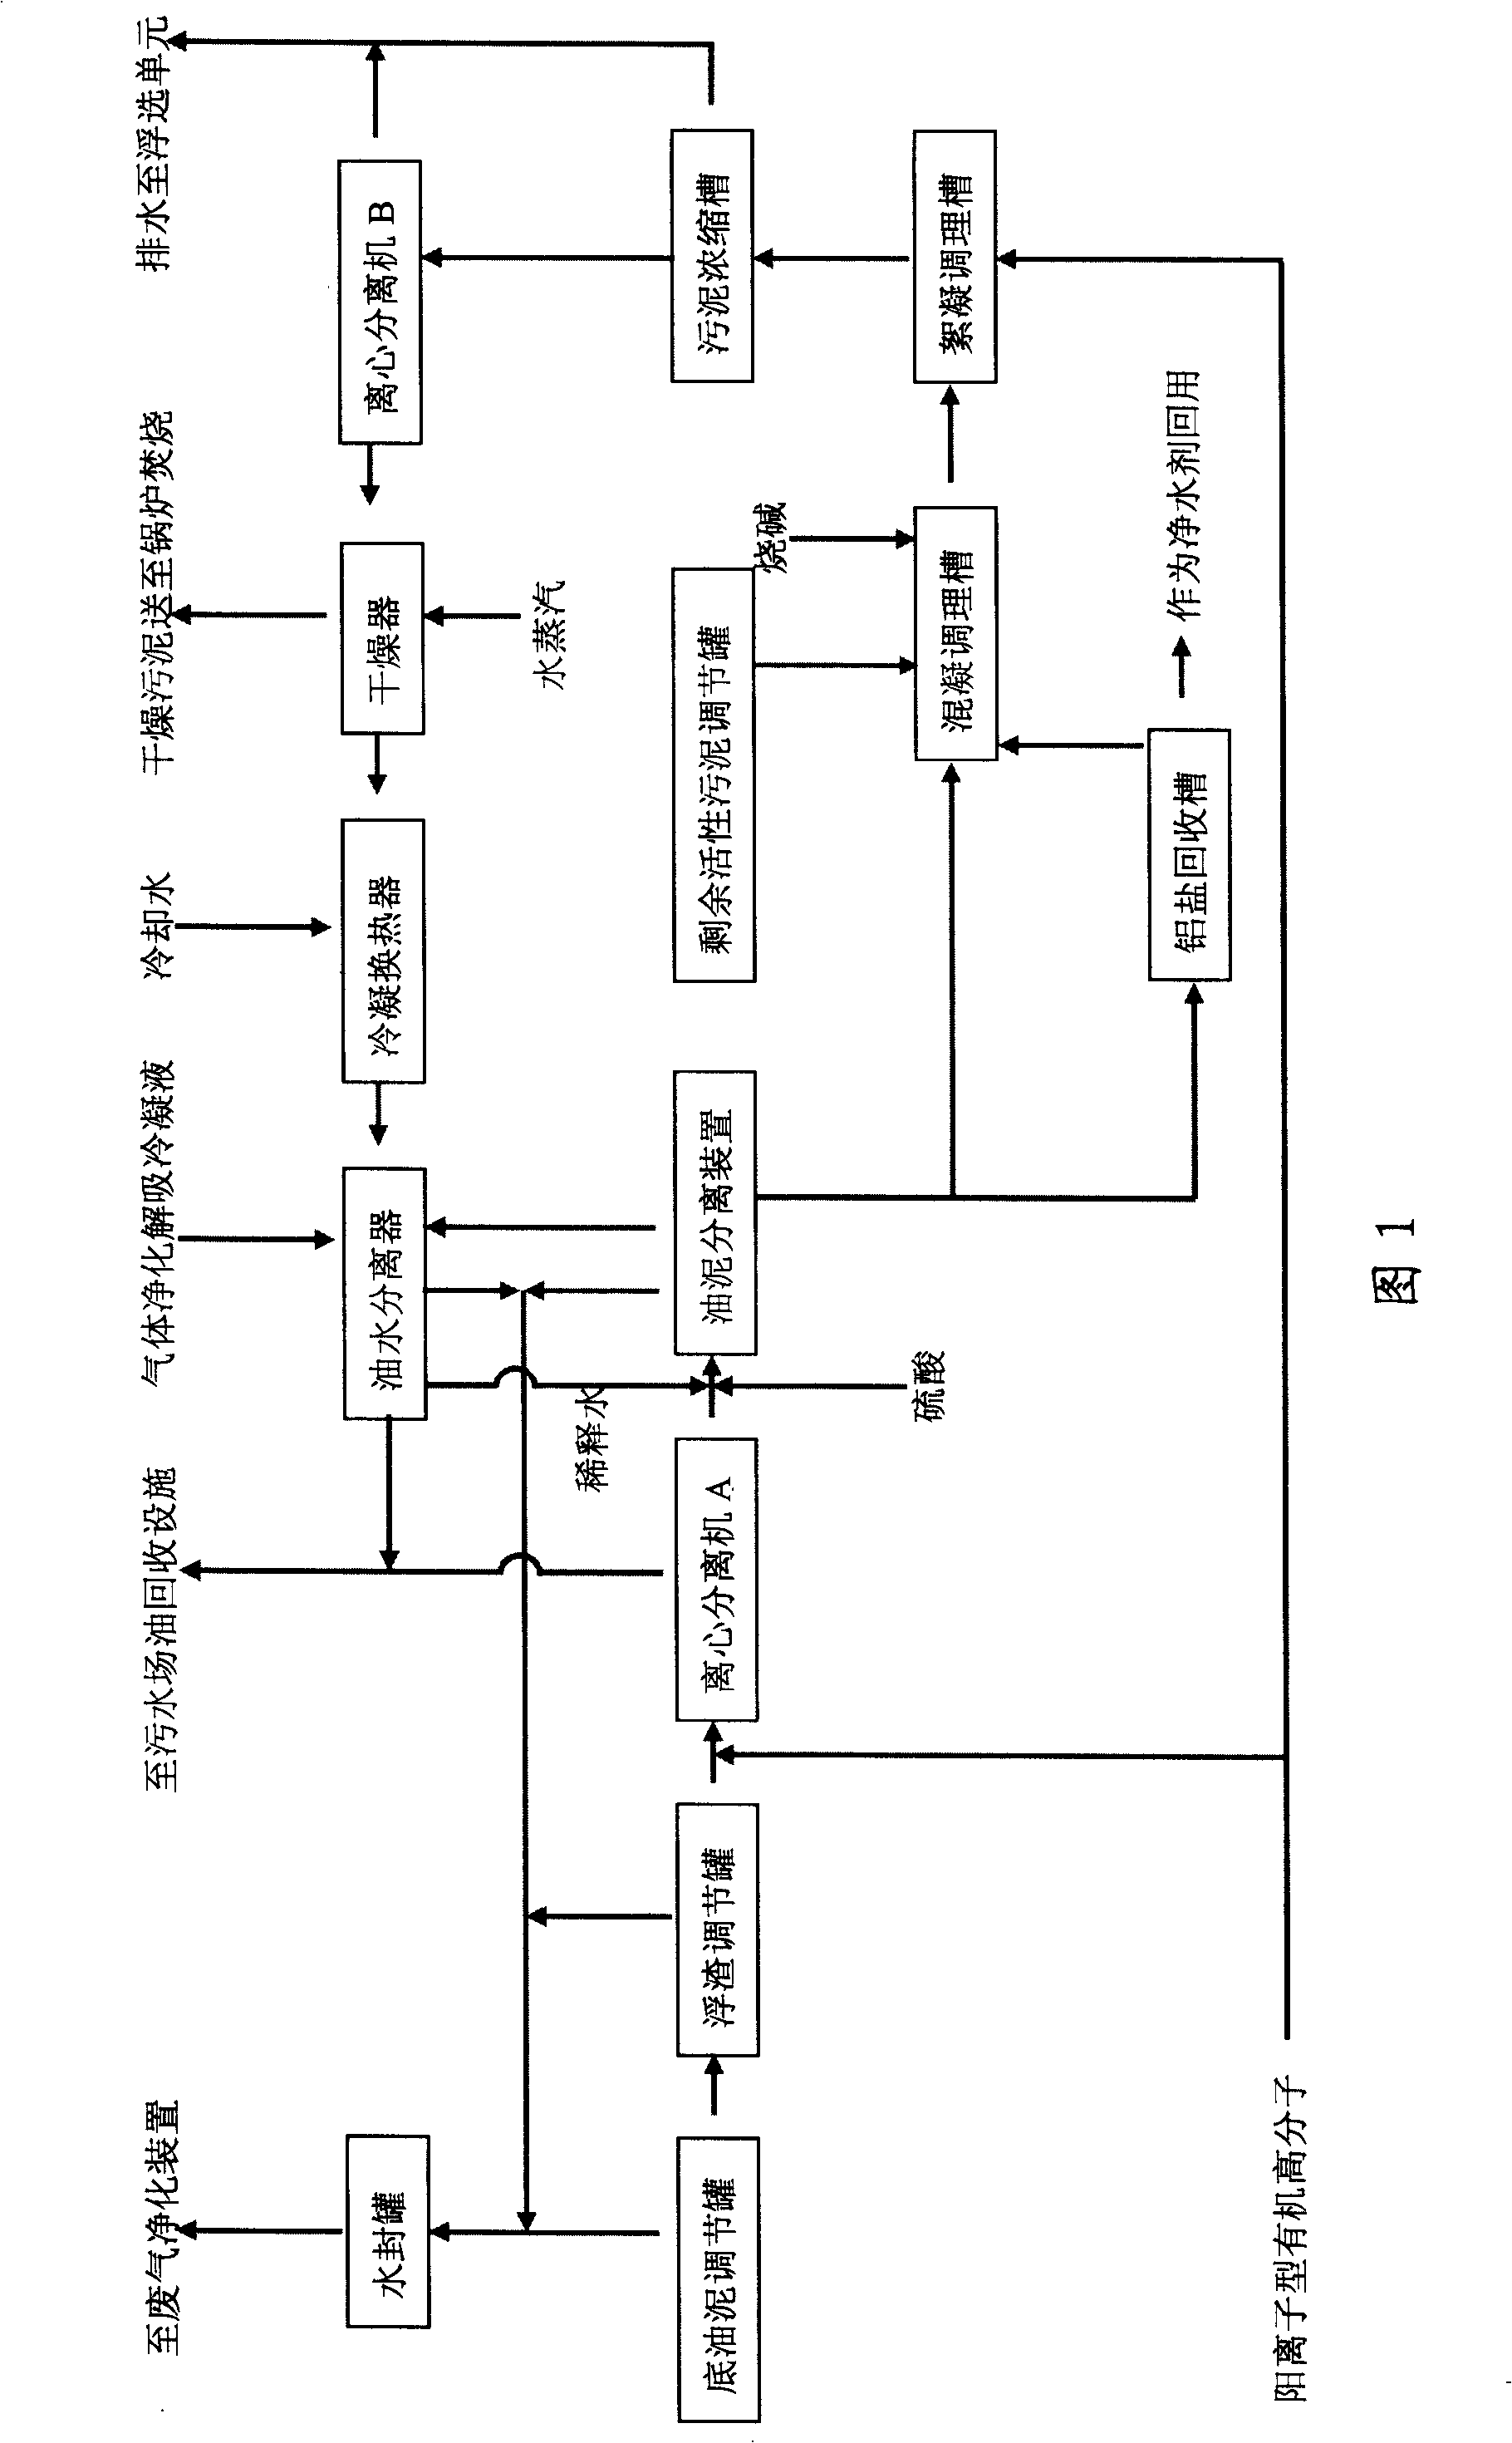 Method for innocent treatment of bottom oil sludge, scruff and active sludge in petro-chemical industry